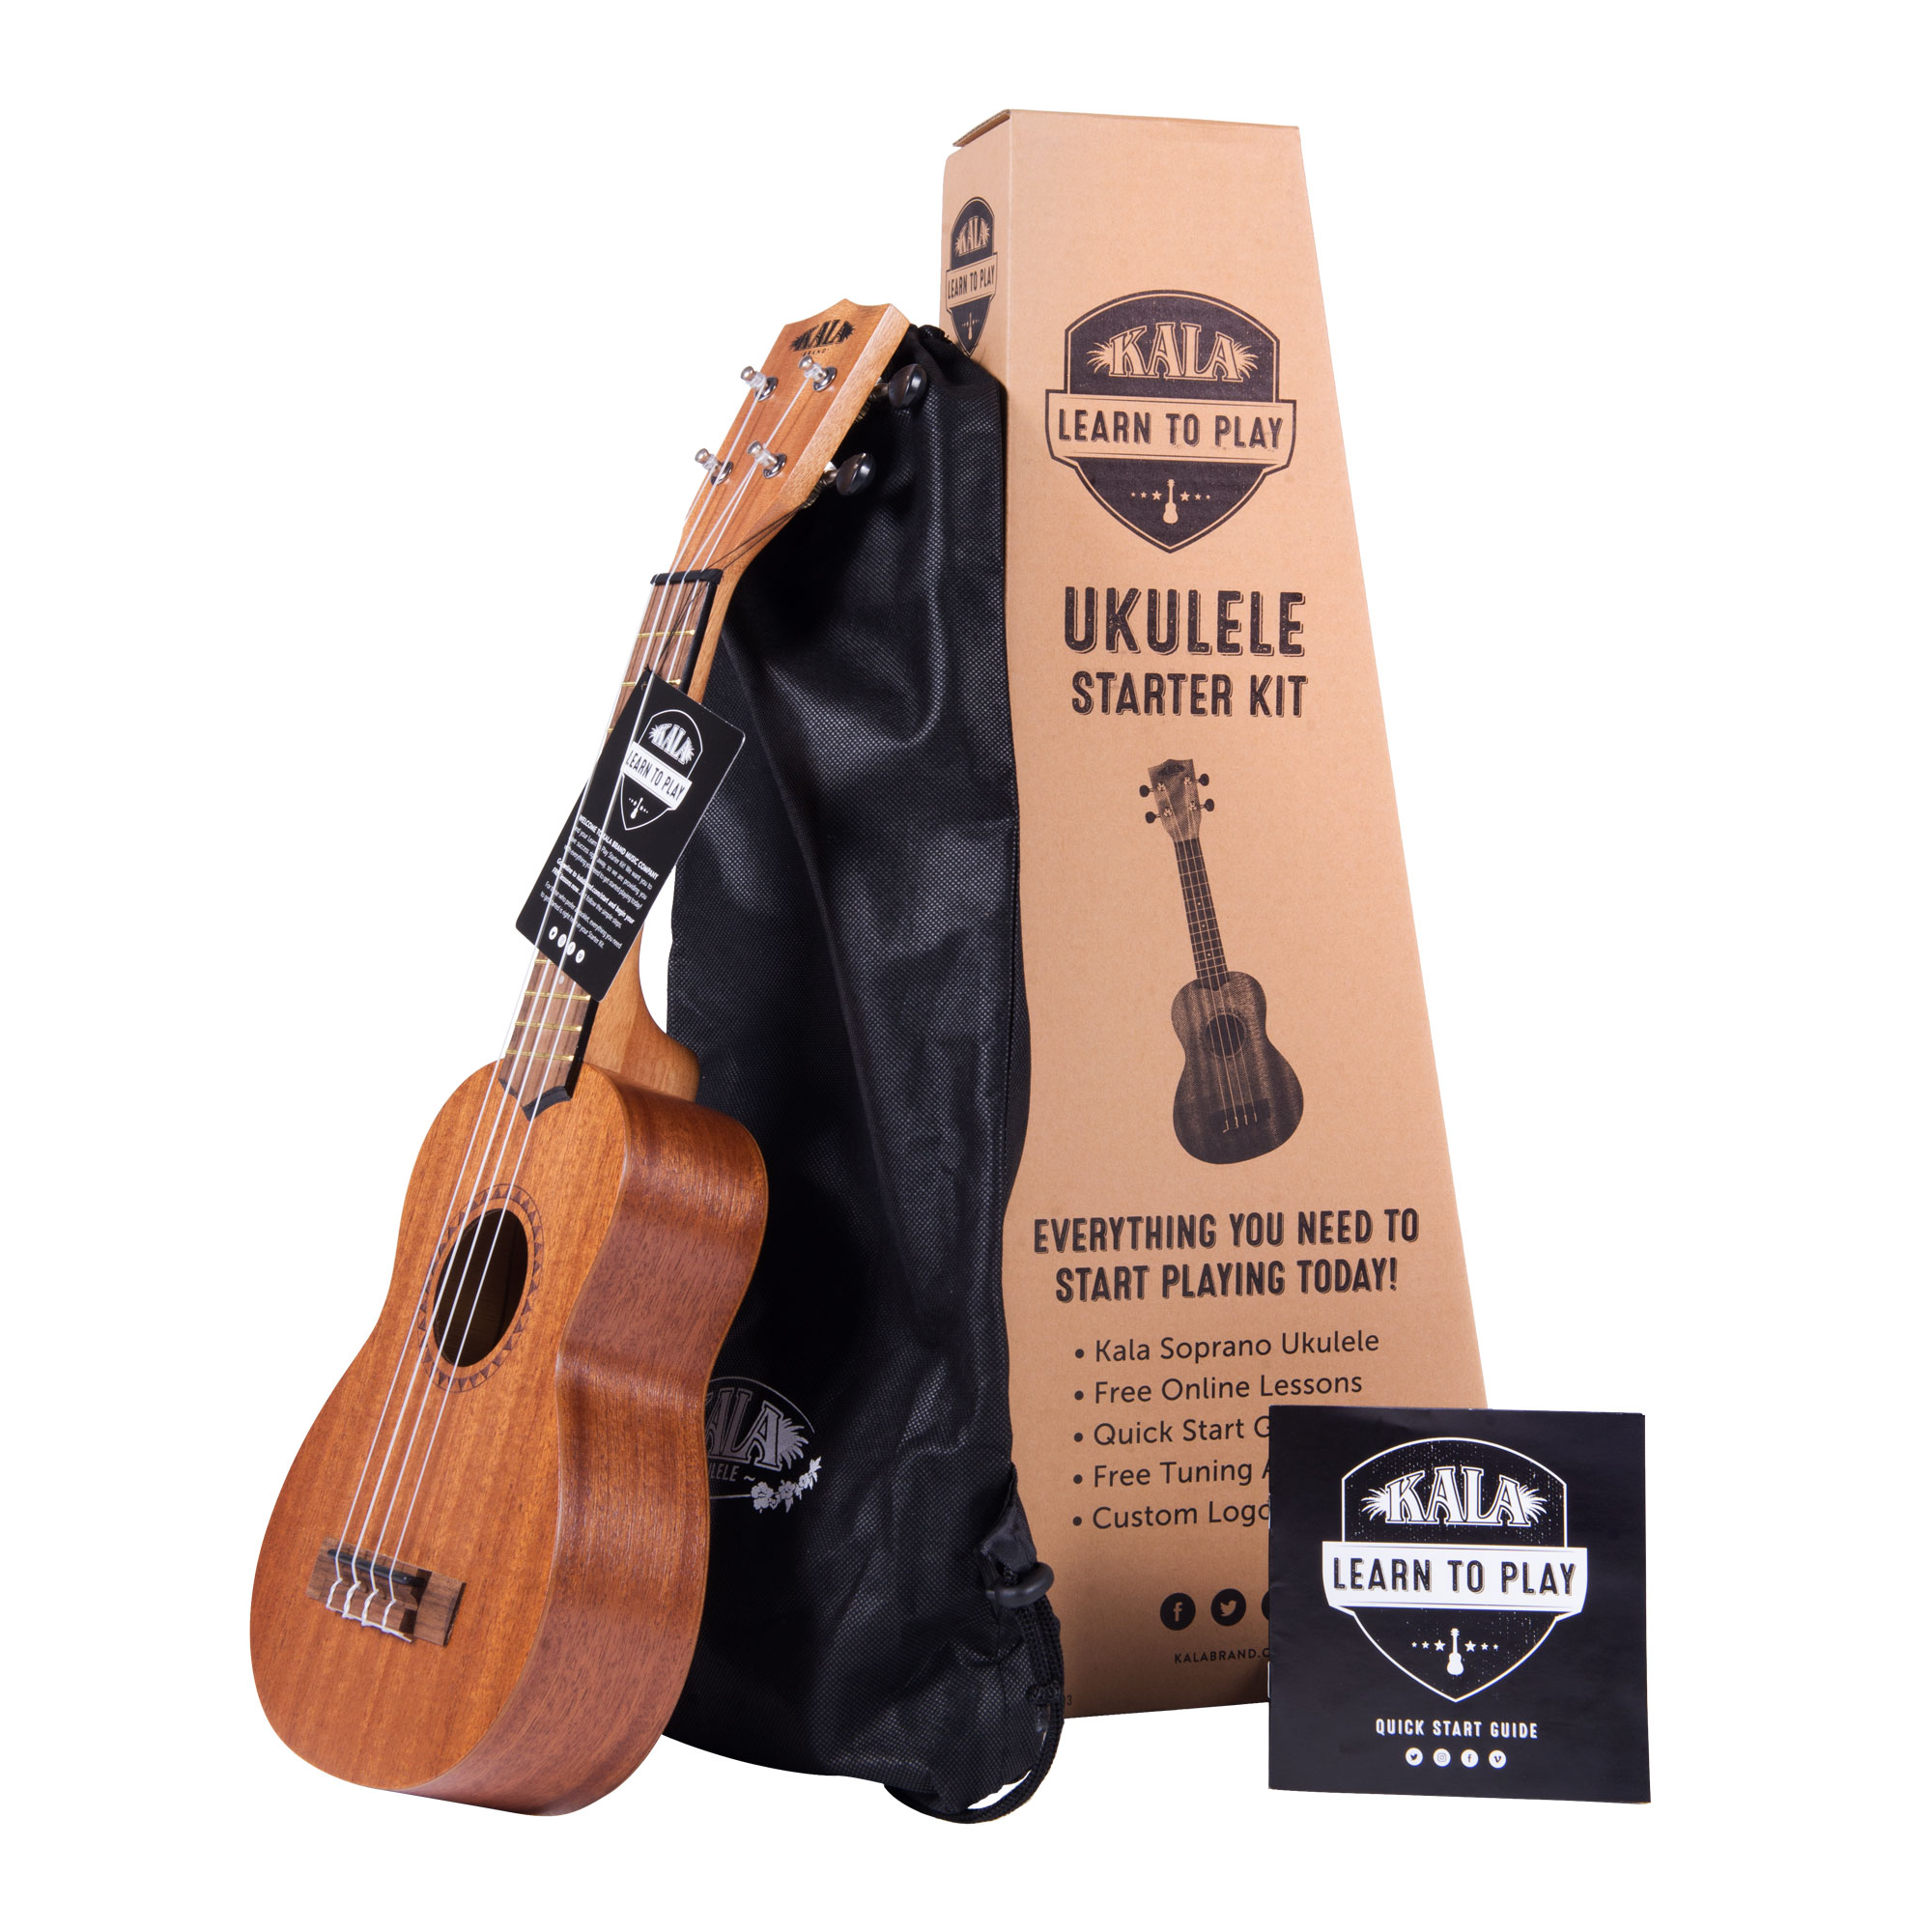 Learn To Play Official Kala Ukulele Starter Kit with FREE, full access, 1-Month subscription to lessons on the Kala App. Ukulele Starter Kit also comes with Bag & Booklet - image 1 of 7